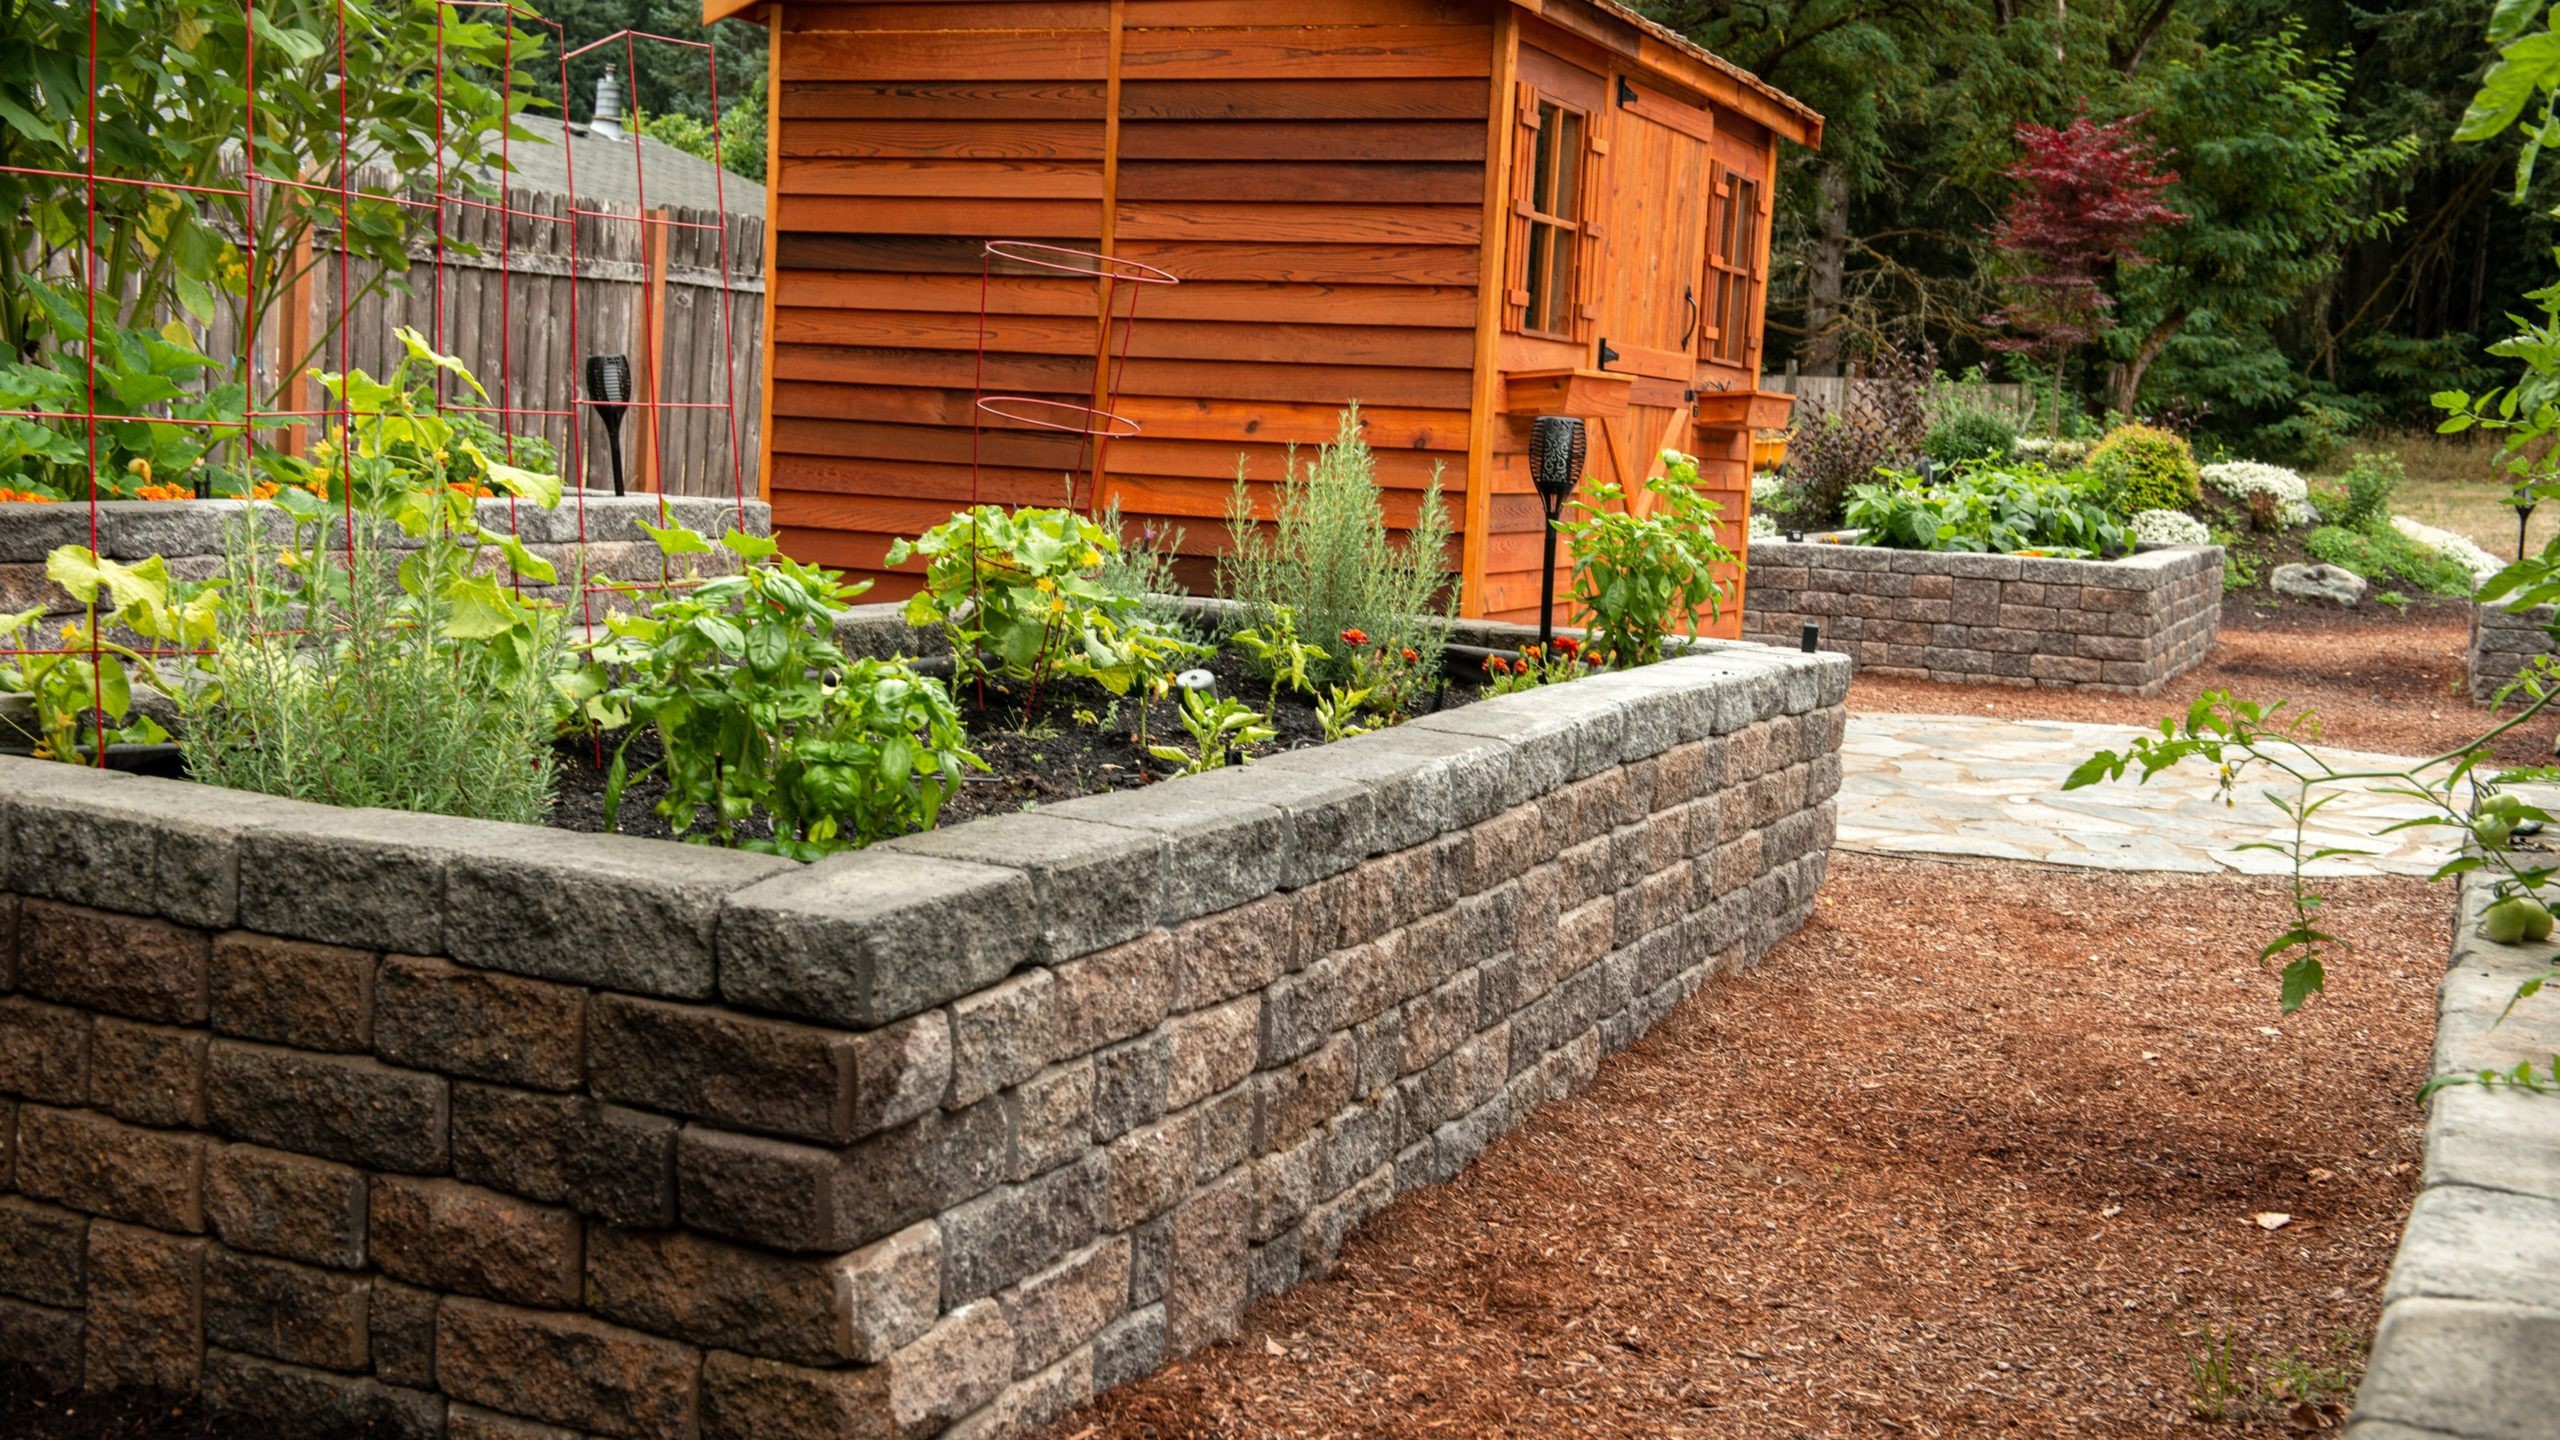 Retaining wall blocks used for garden beds